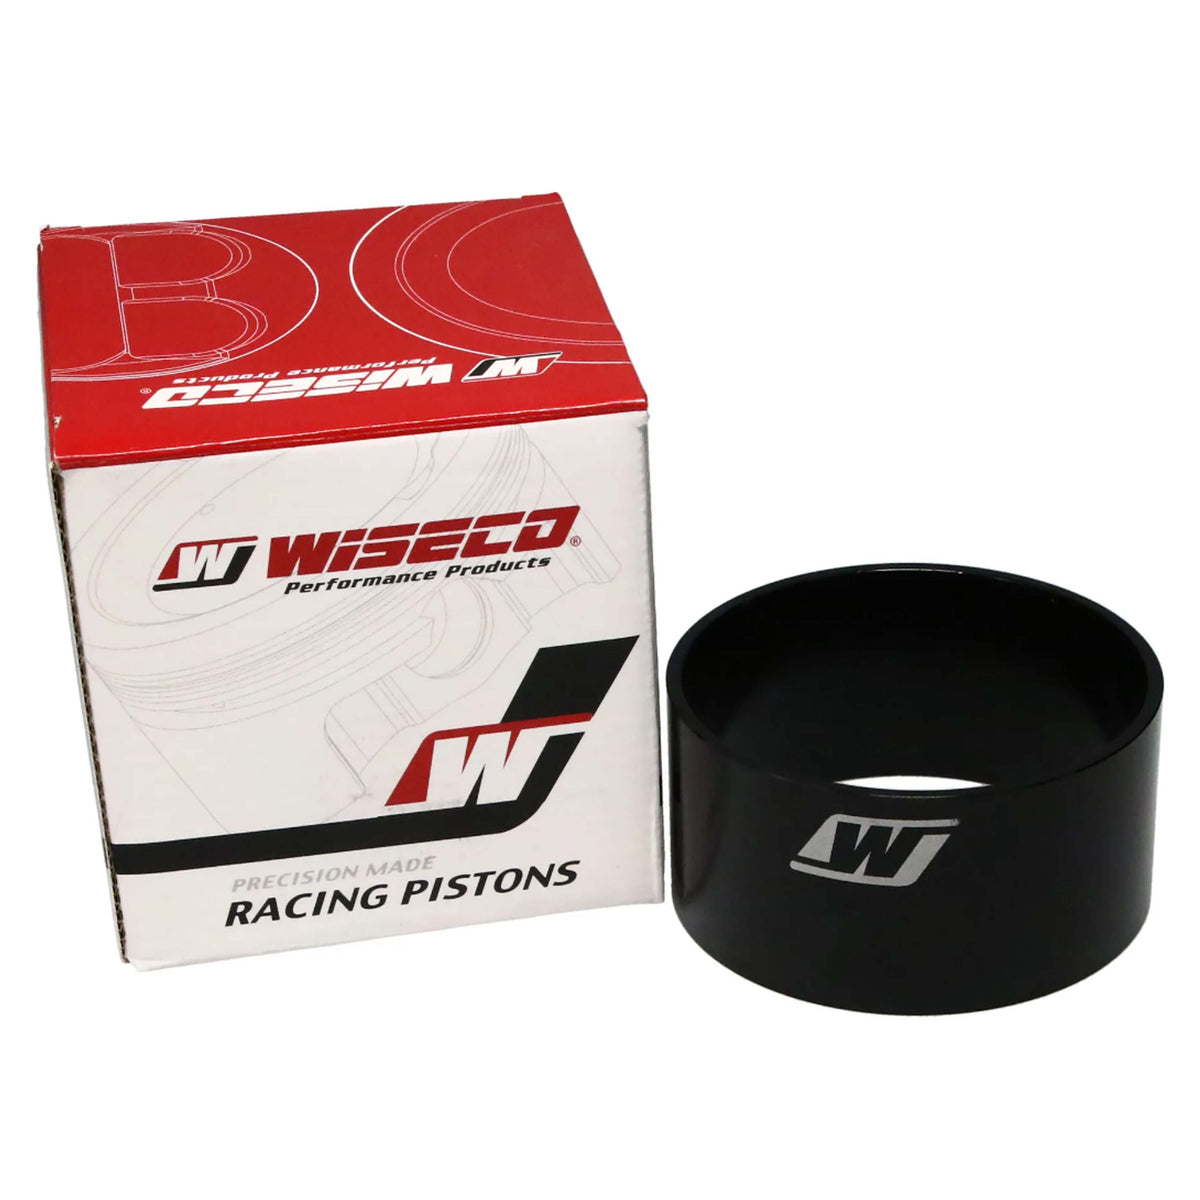 Wiseco Piston Ring Compressor - Z1 Motorsports - Performance OEM and  Aftermarket Engineered Parts Global Leader In 300ZX 350Z 370Z G35 G37 Q50  Q60